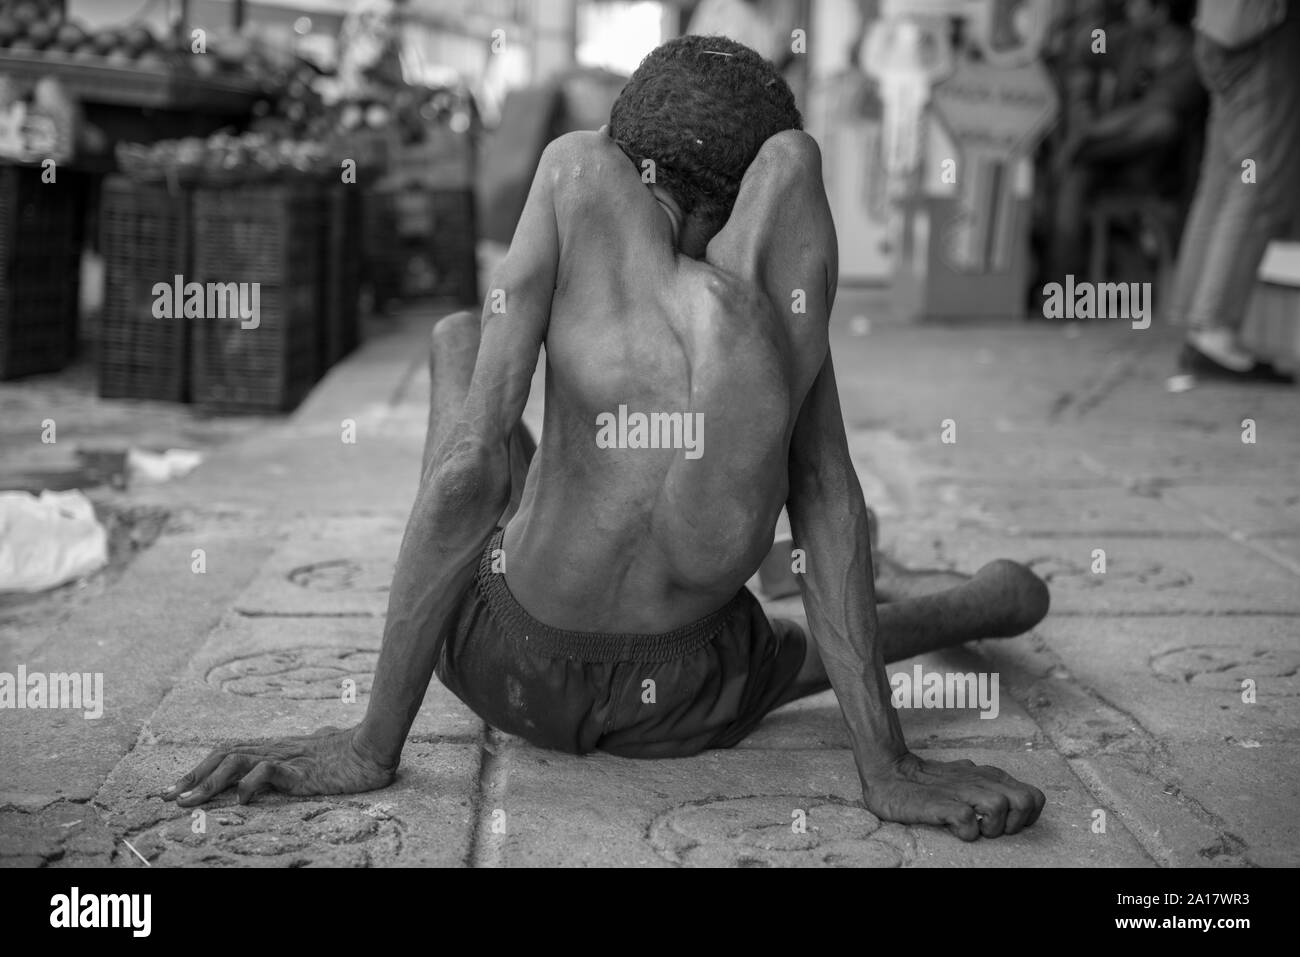 Homeless man with congenital disease facing life in the streets Stock Photo